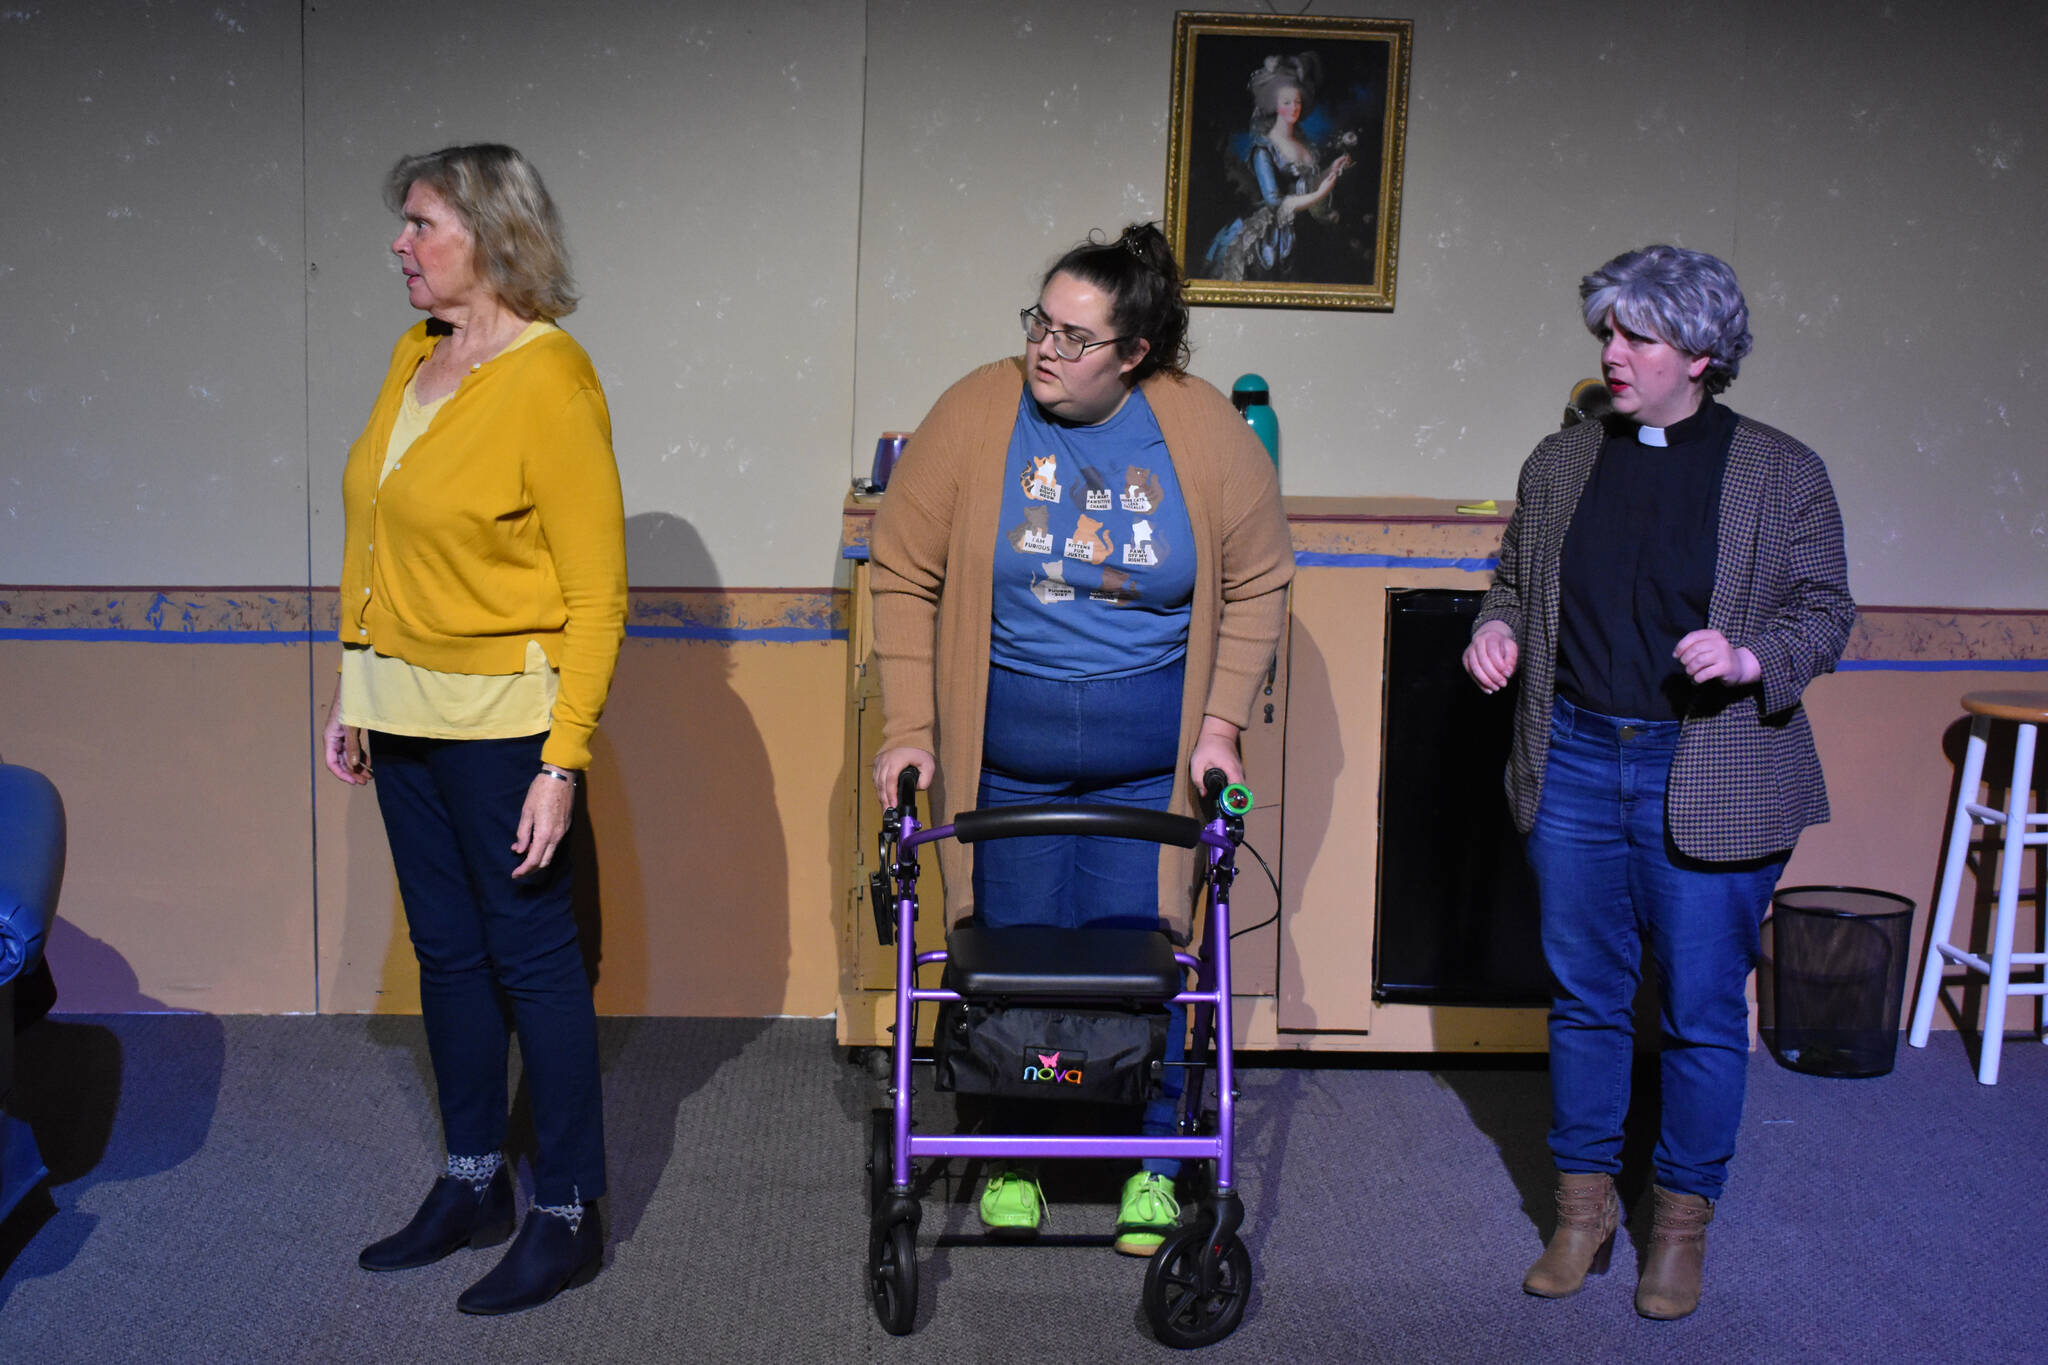 Terri Zopf-Schoessler, Nikki Stein and Lacey Jane Brewster act in a rehearsal for “Menopause Made Me Do It” on Tuesday, Sept. 13, 2022 in Soldotna, Alaska. (Jake Dye/Peninsula Clarion)